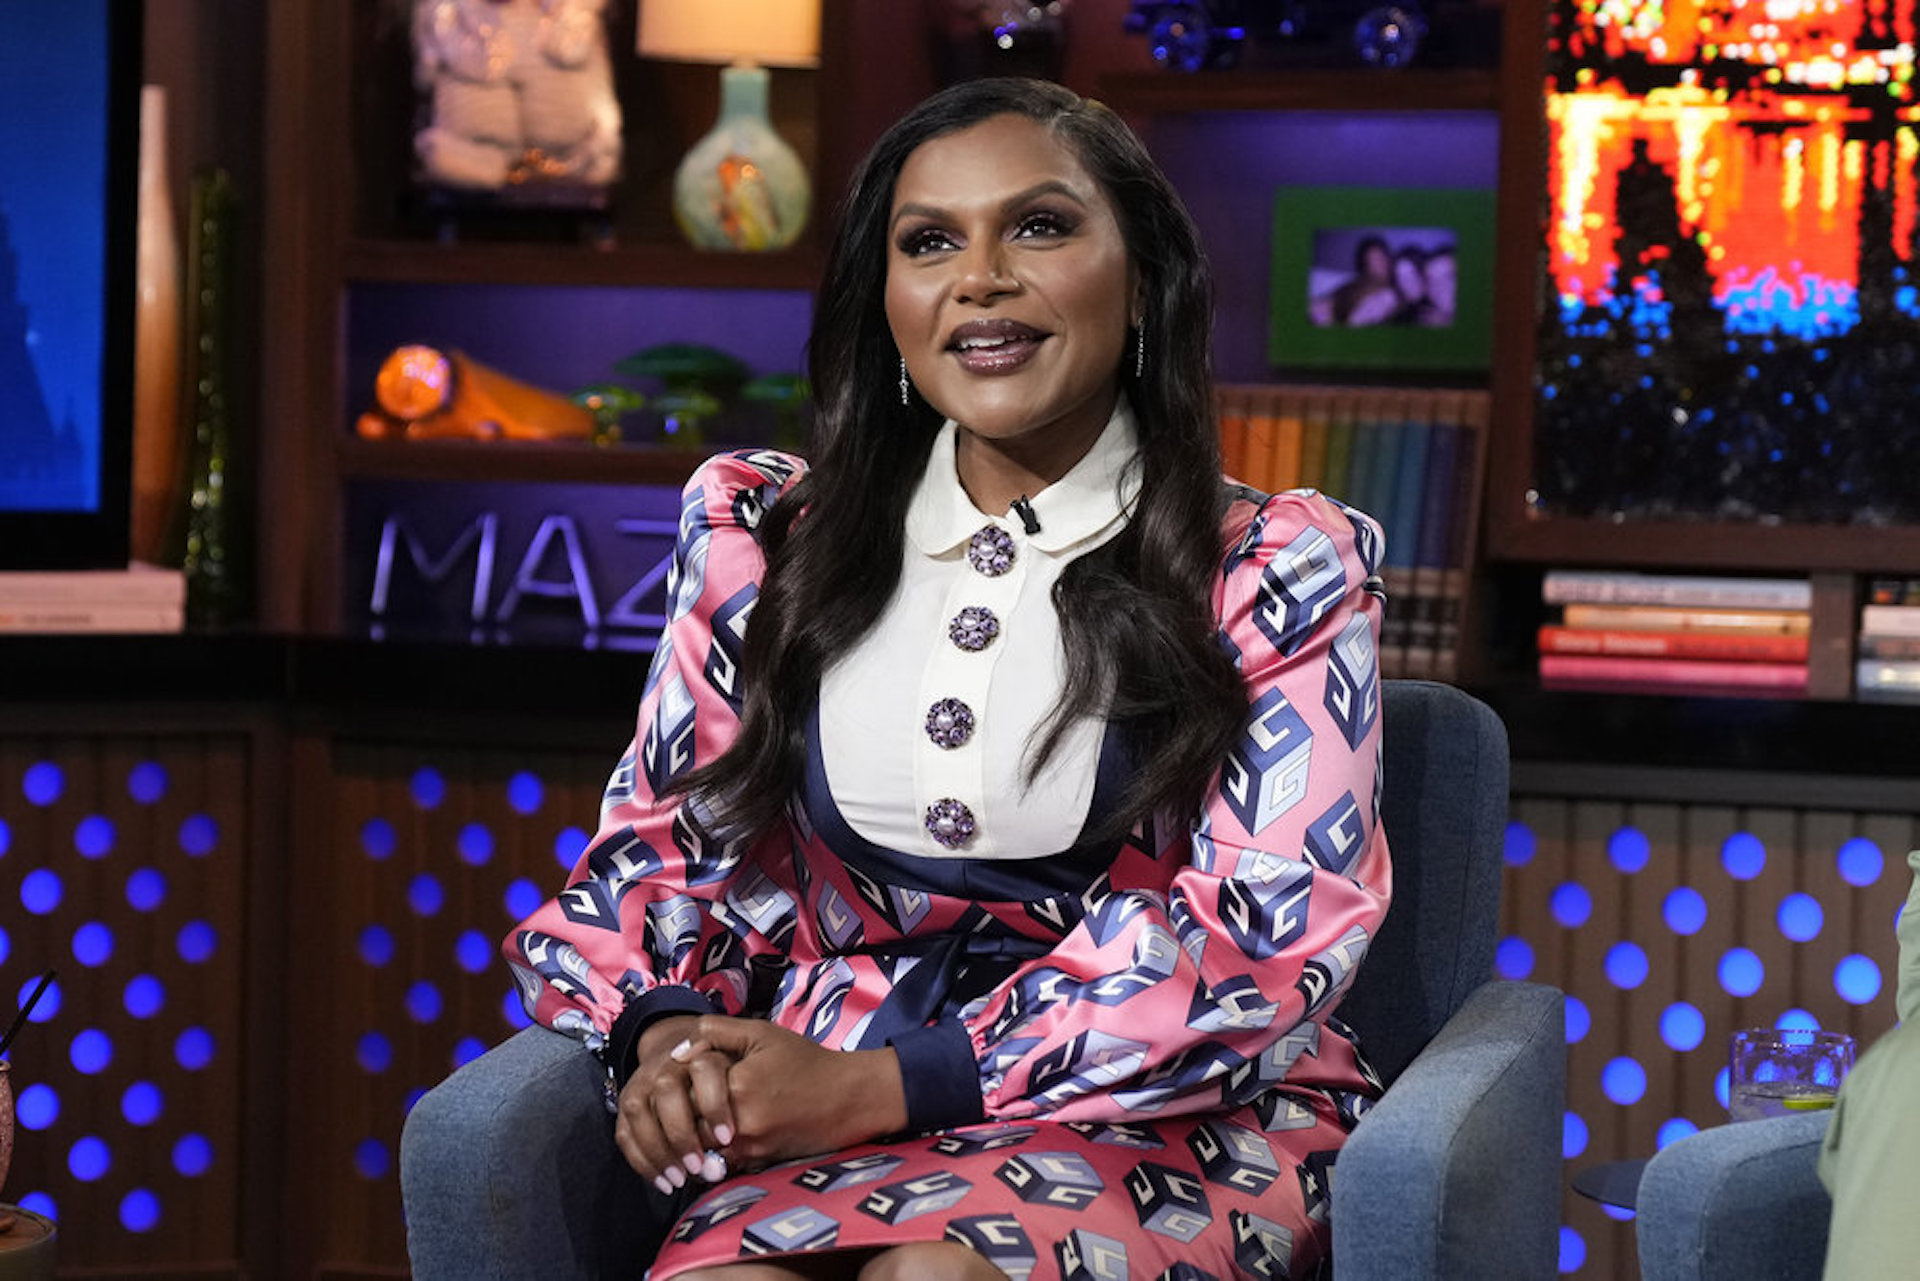 Mindy Kaling flashes her bra on a break from filming The Mindy Project